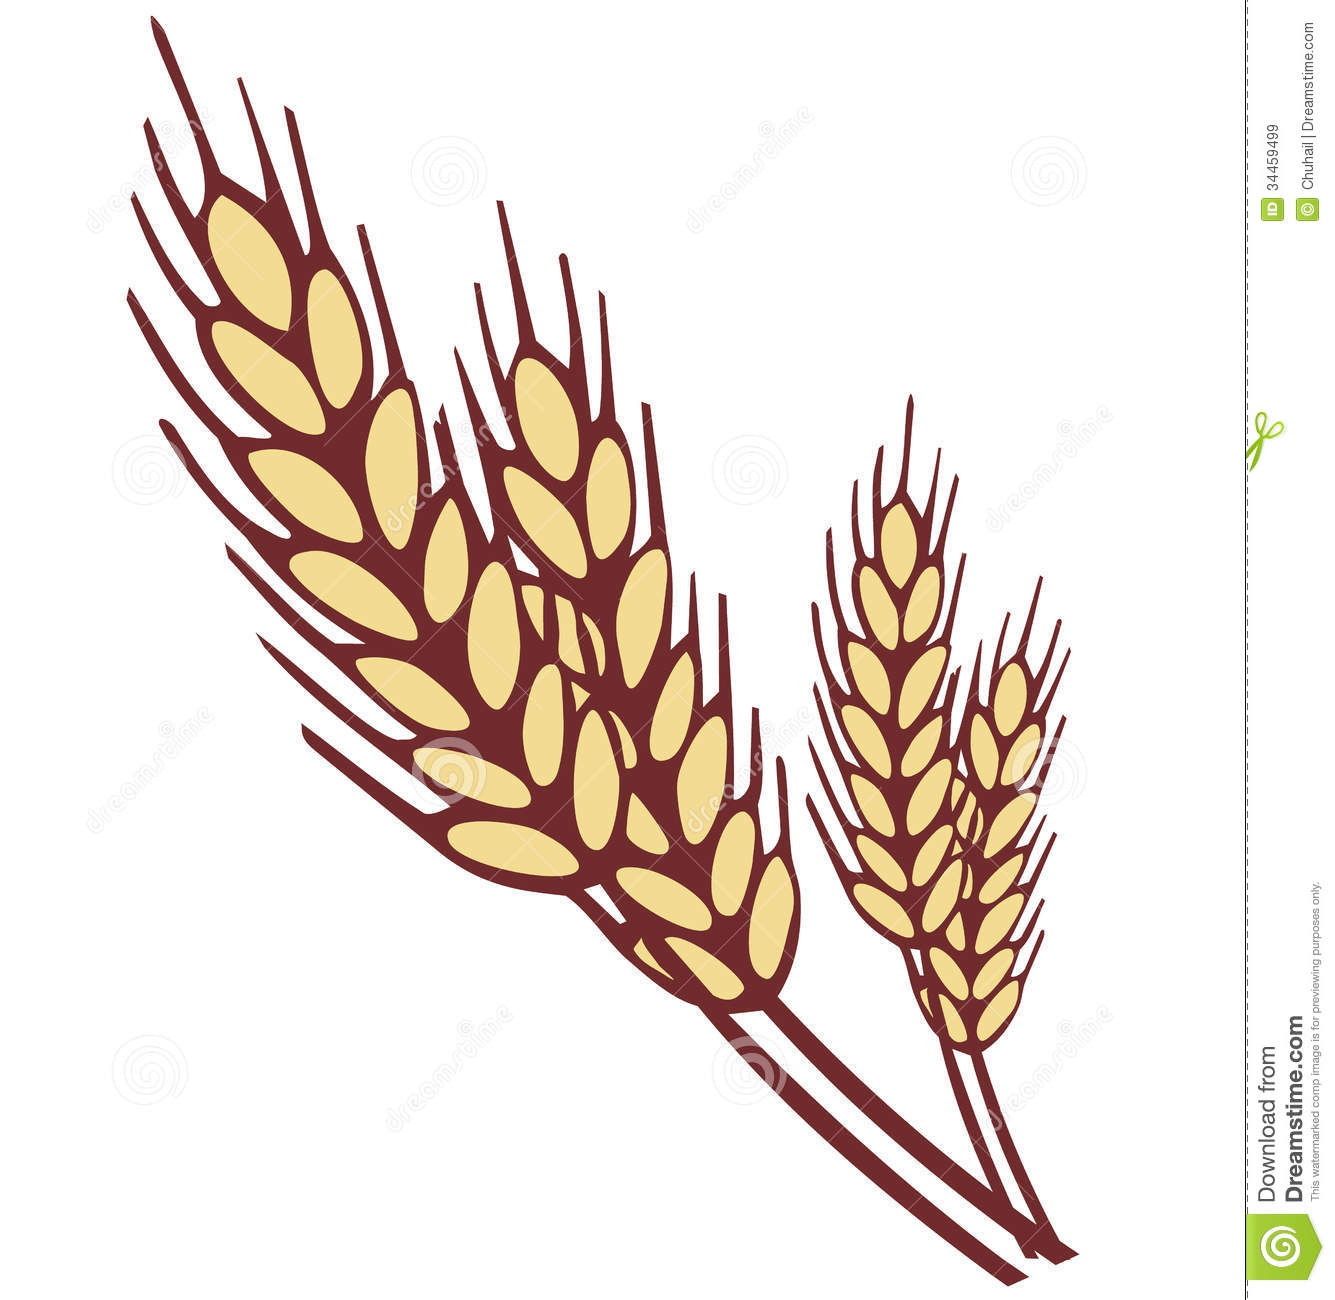 Ears of Wheat PNG Clipart